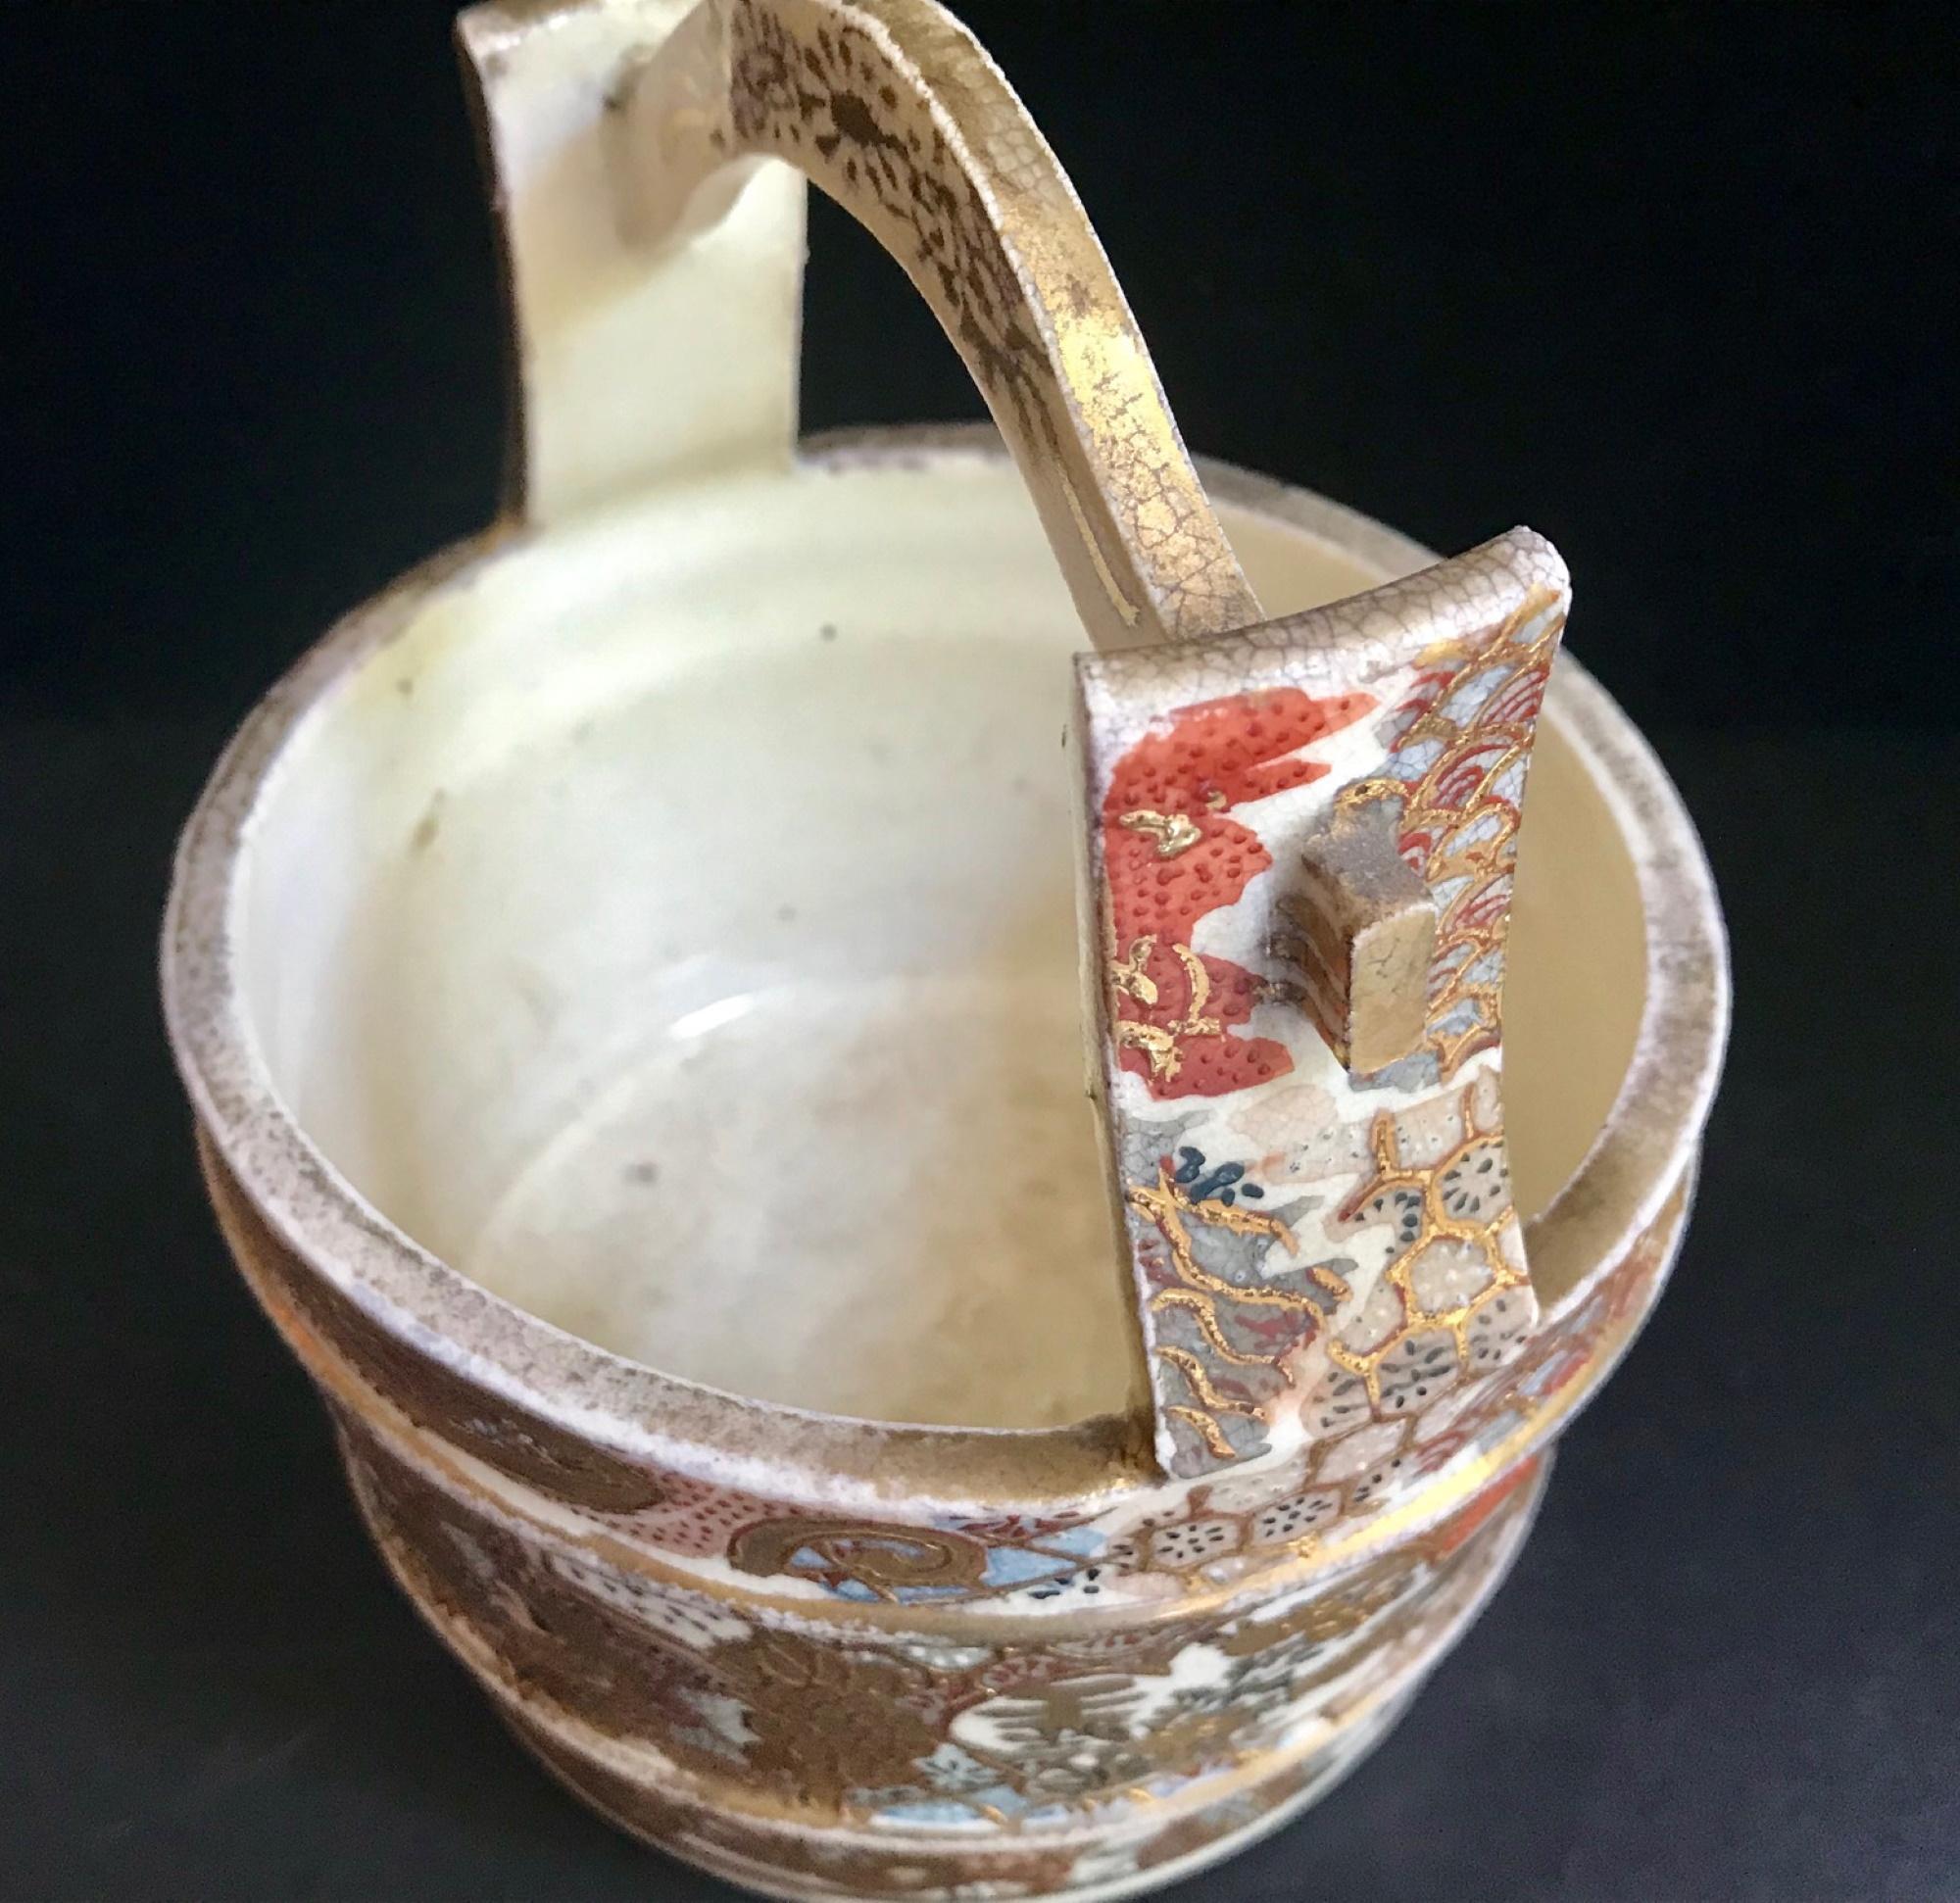 19th Century Japanese Satsuma Porcelain Water Well Bucket, Wishing Well Vase In Good Condition For Sale In Vero Beach, FL